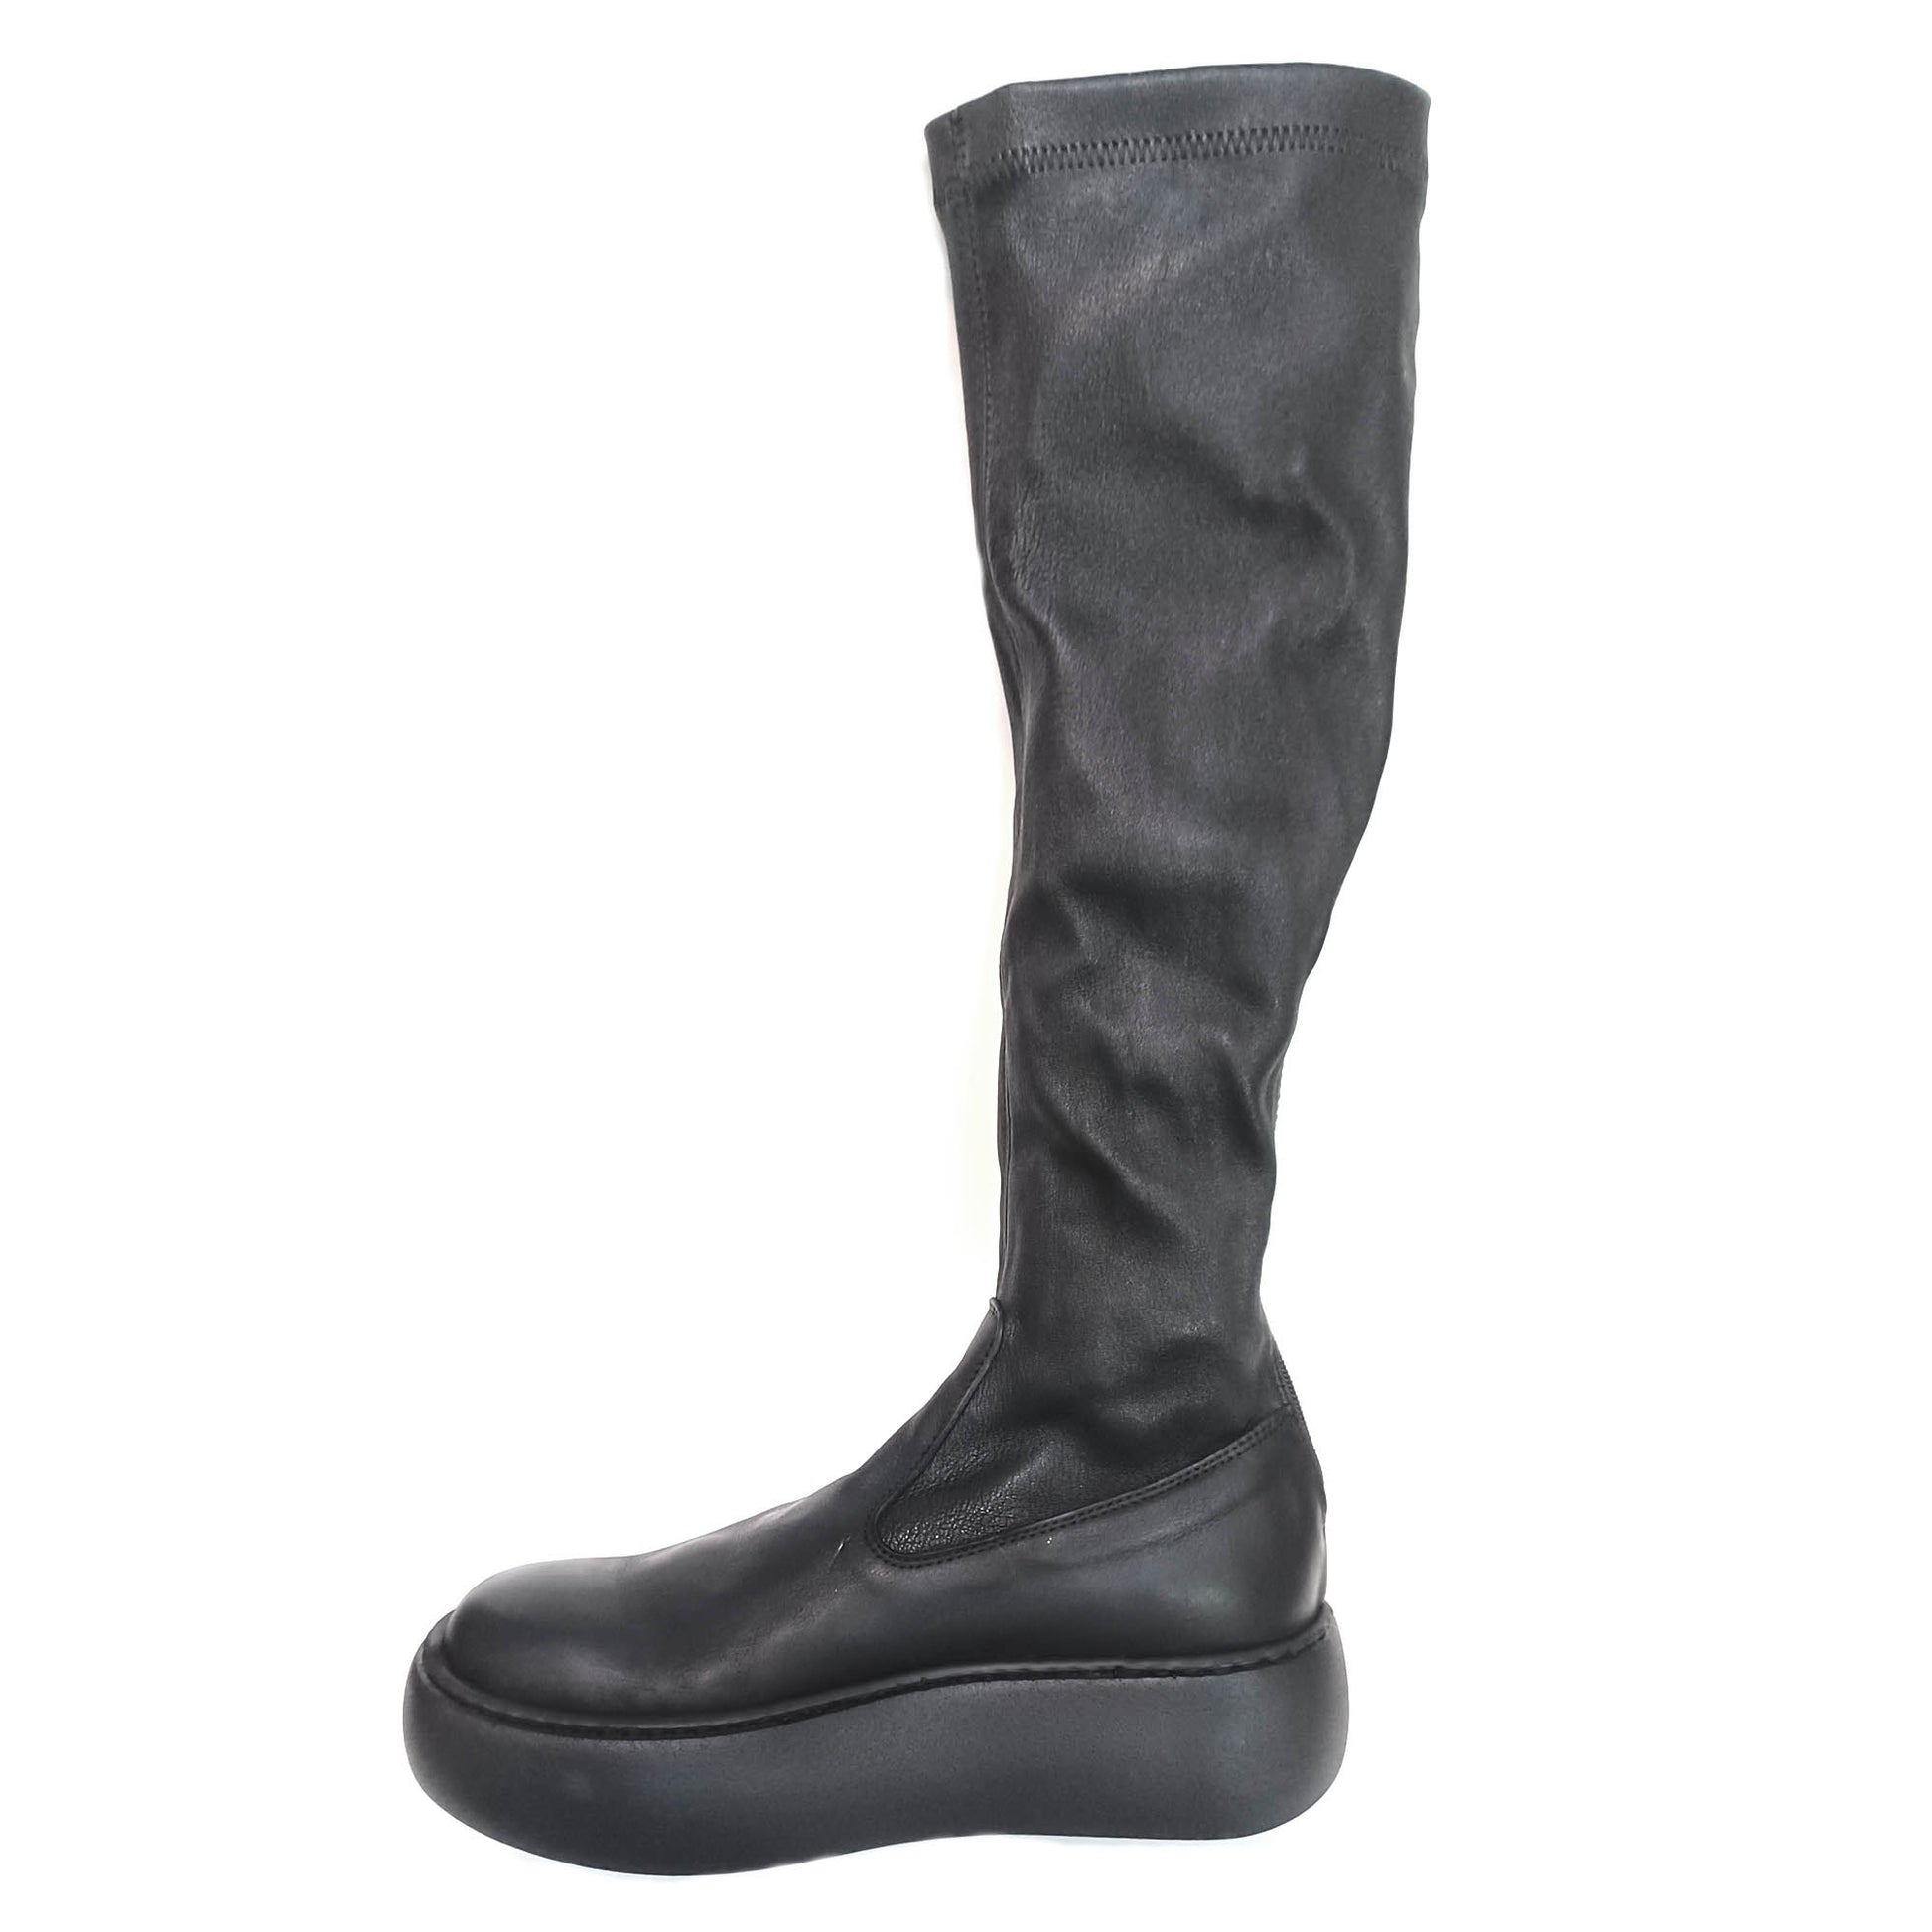 Stretch leather long boots